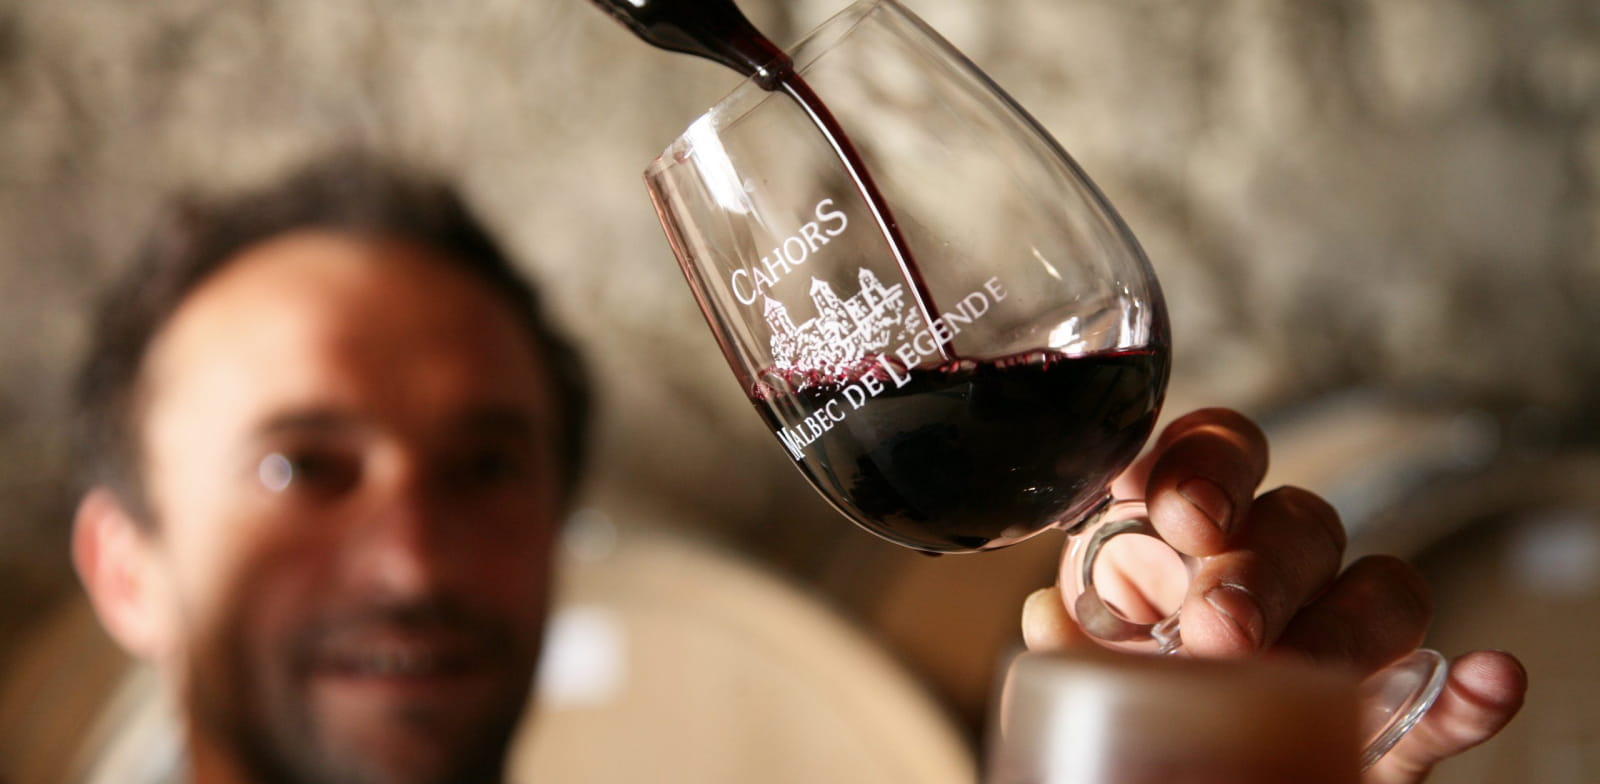 Guided tours and tastings - groups - Cahors-Lot Valley